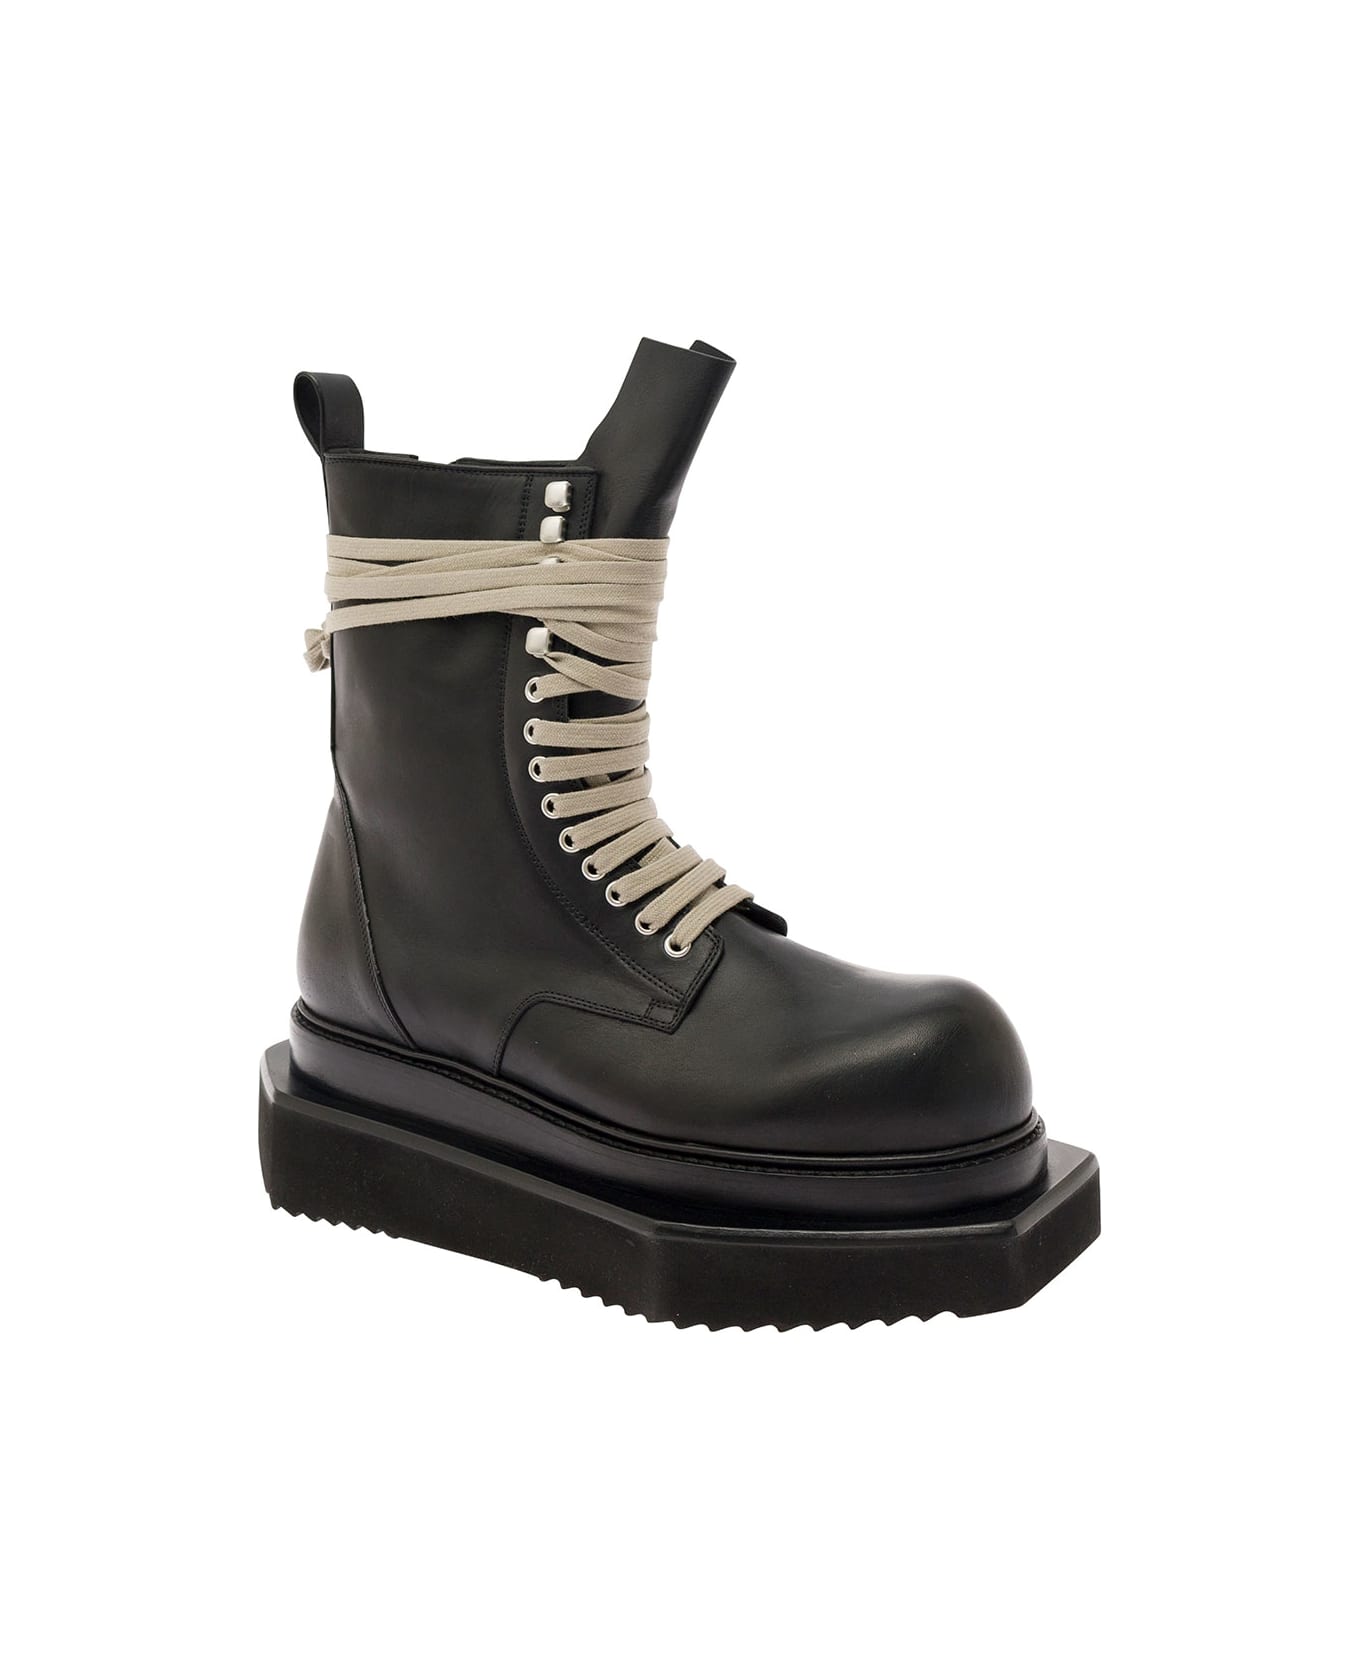 Rick Owens 'laceup Turbo Cyclops' Boots - Black